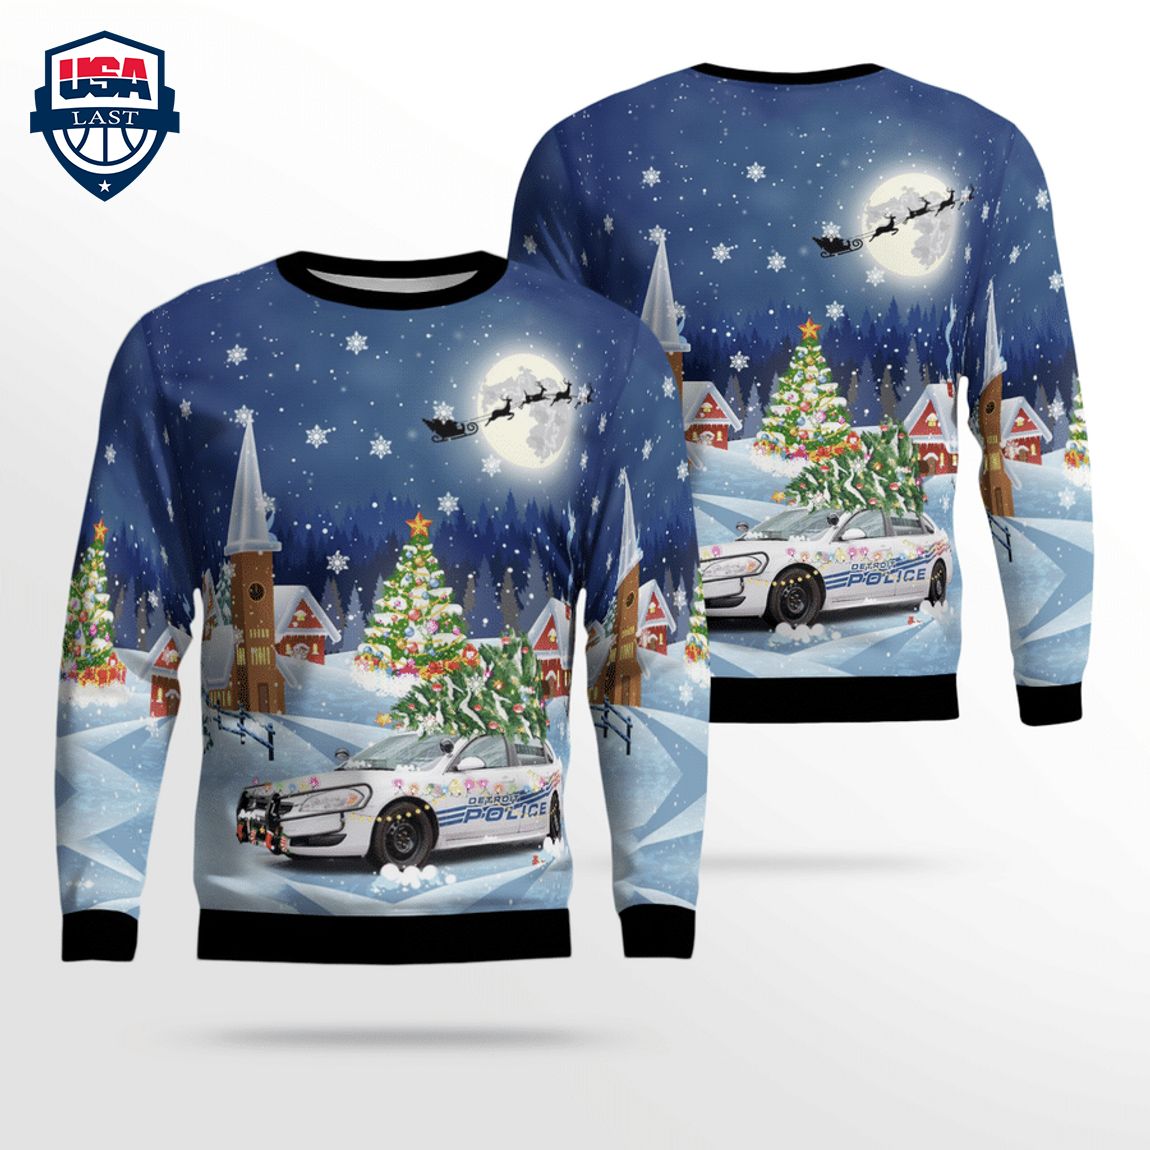 Detroit Police Department 3D Christmas Sweater - Cool look bro